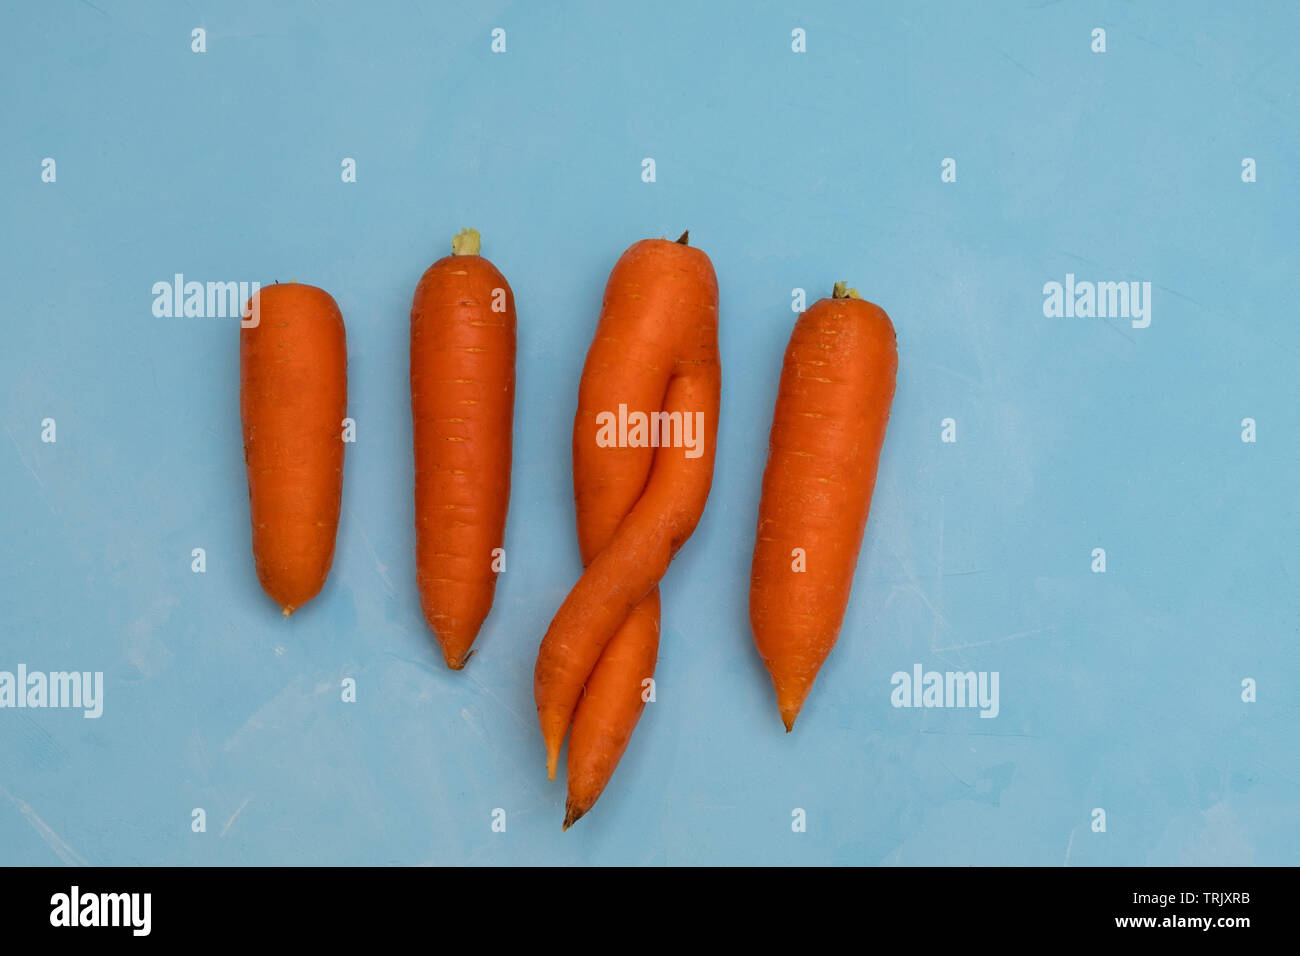 One weird ugly carot among other normal carrots on blue background. Zero waste concept. Stock Photo